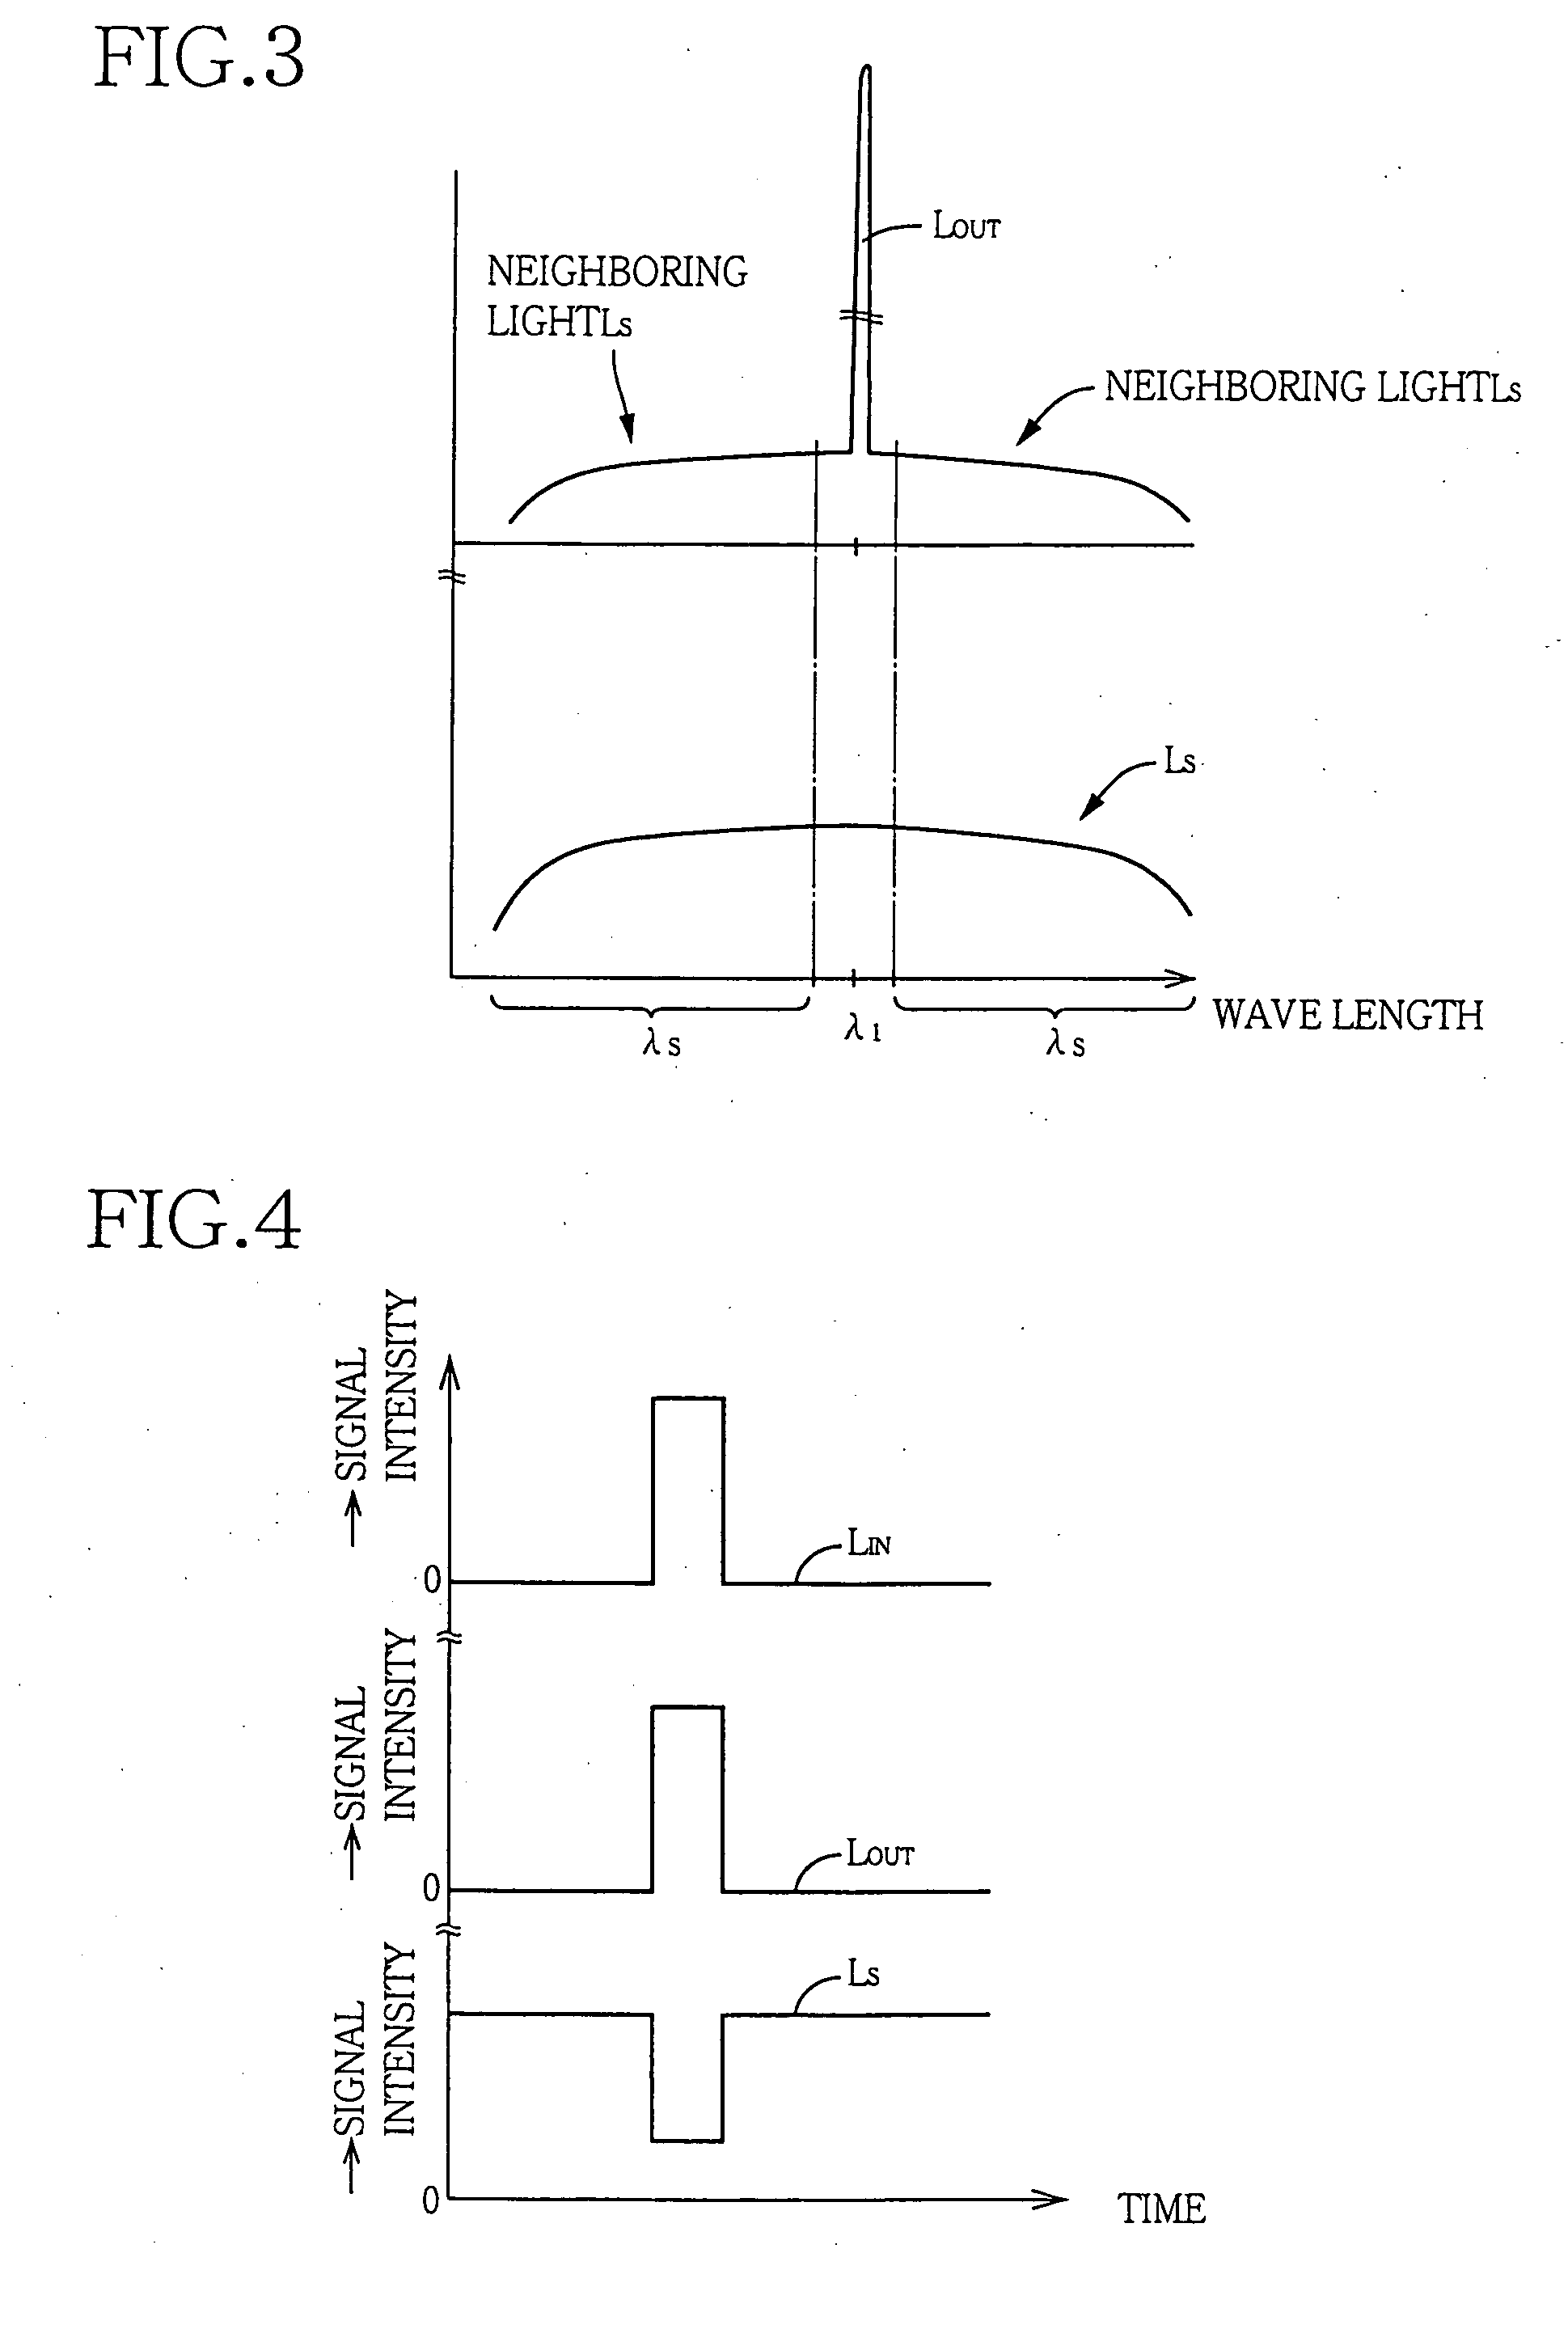 Optical signal amplification device